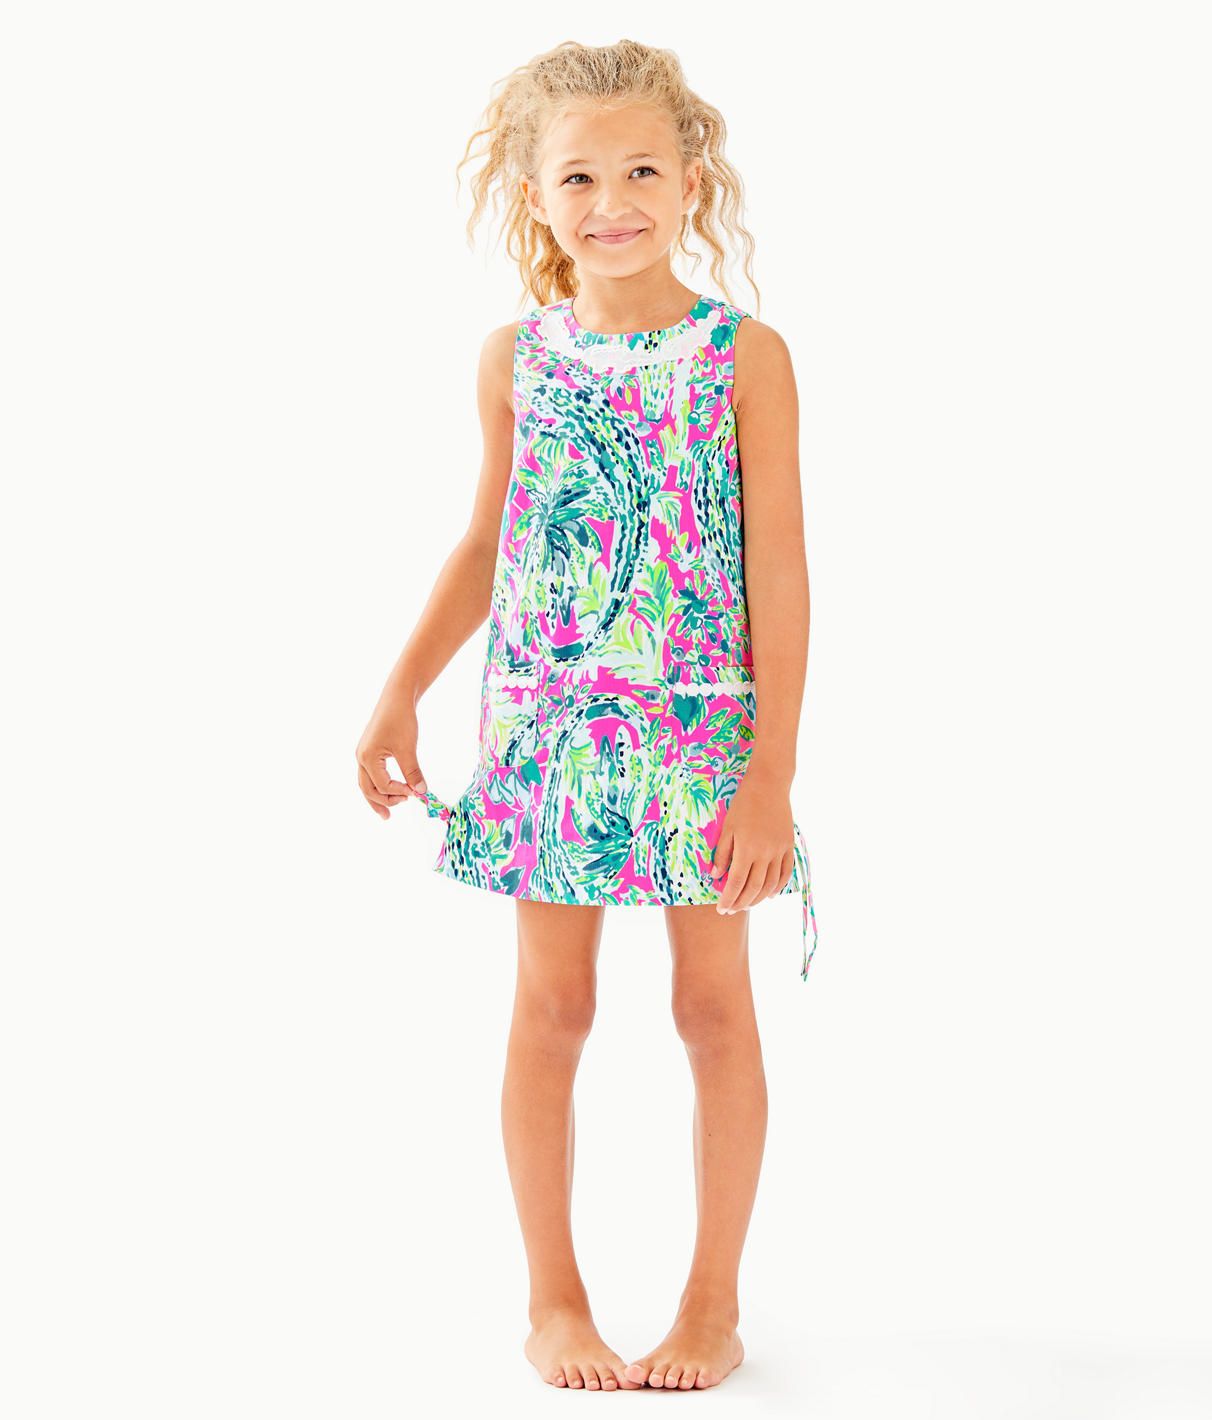 Lilly Pulitzer Girls Little Lilly Classic Shift Dress | Lilly Pulitzer